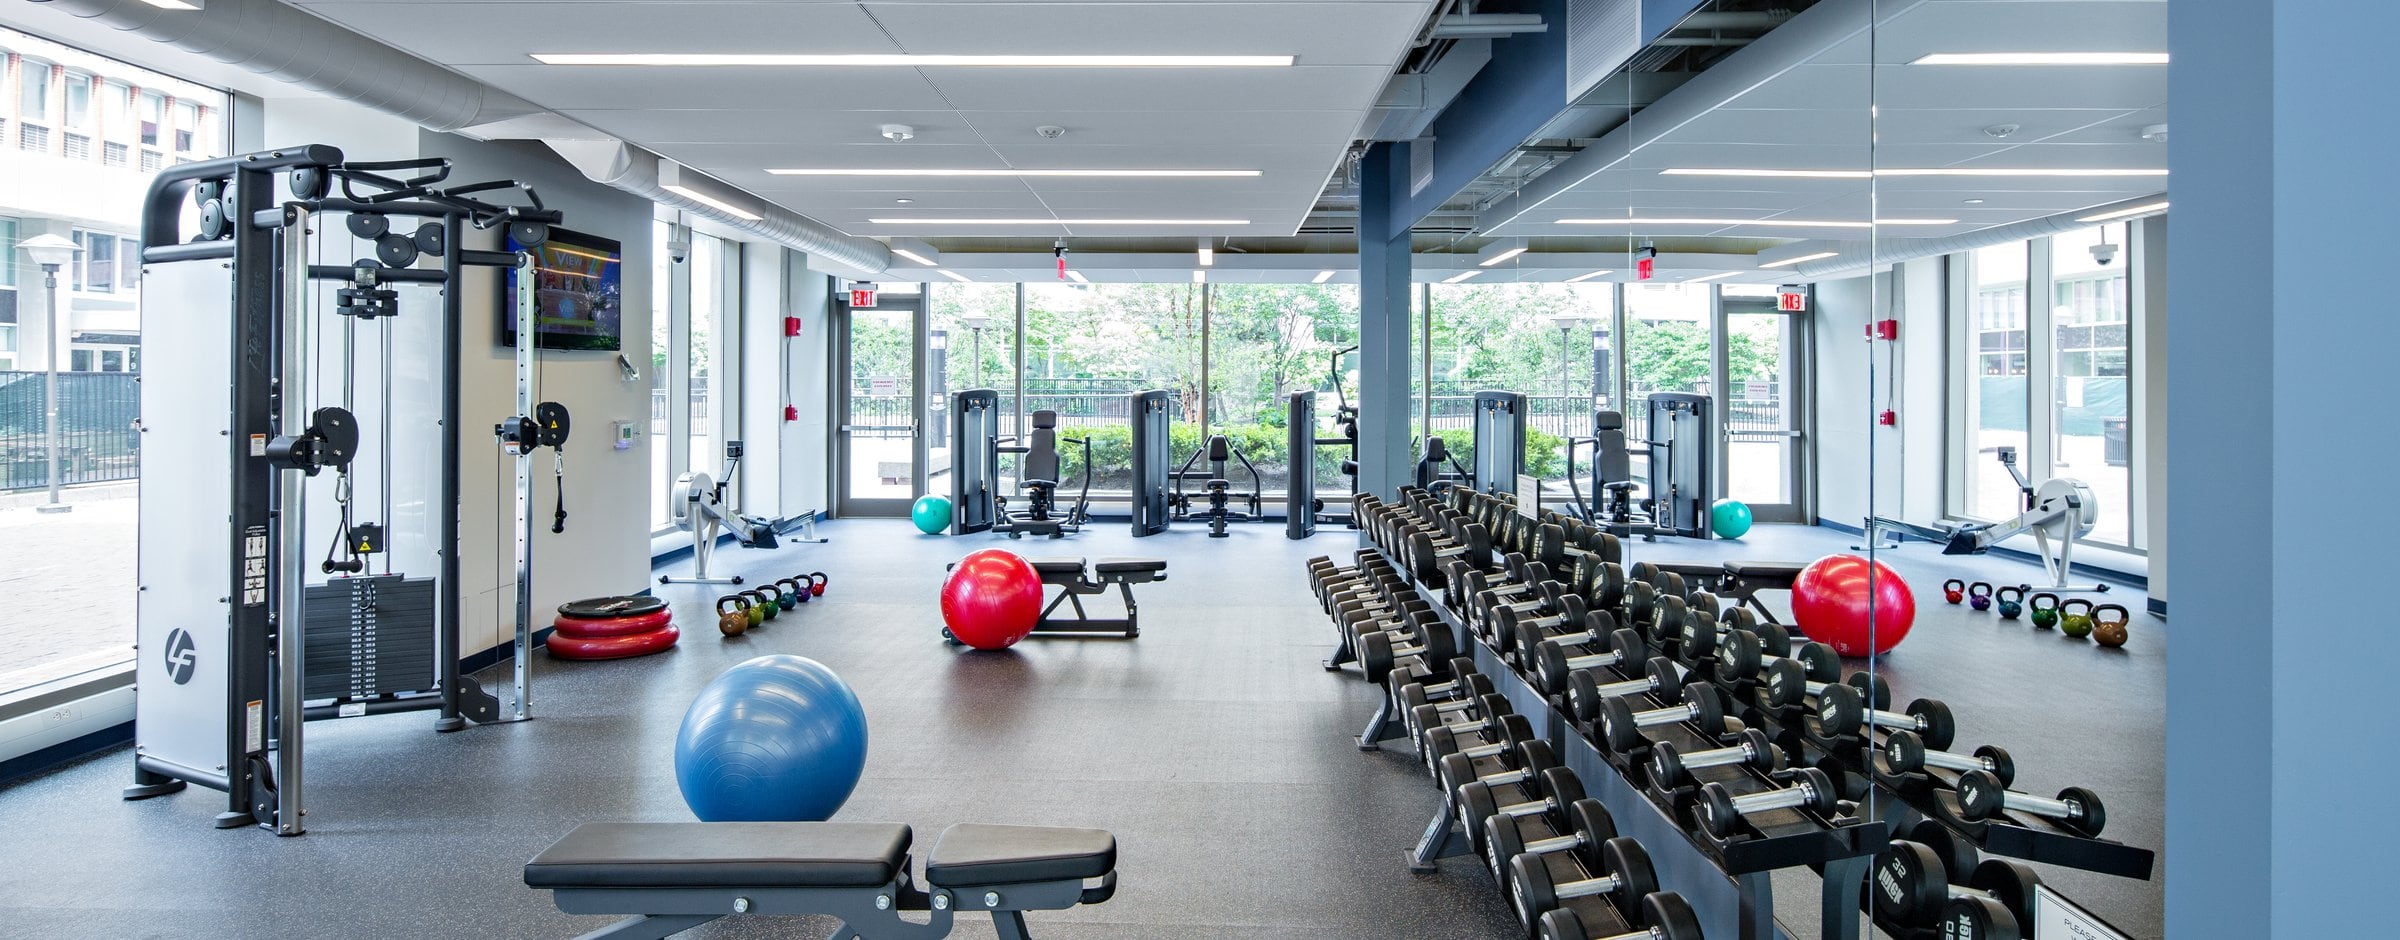 Avalon at Prudential Center Fitness Center